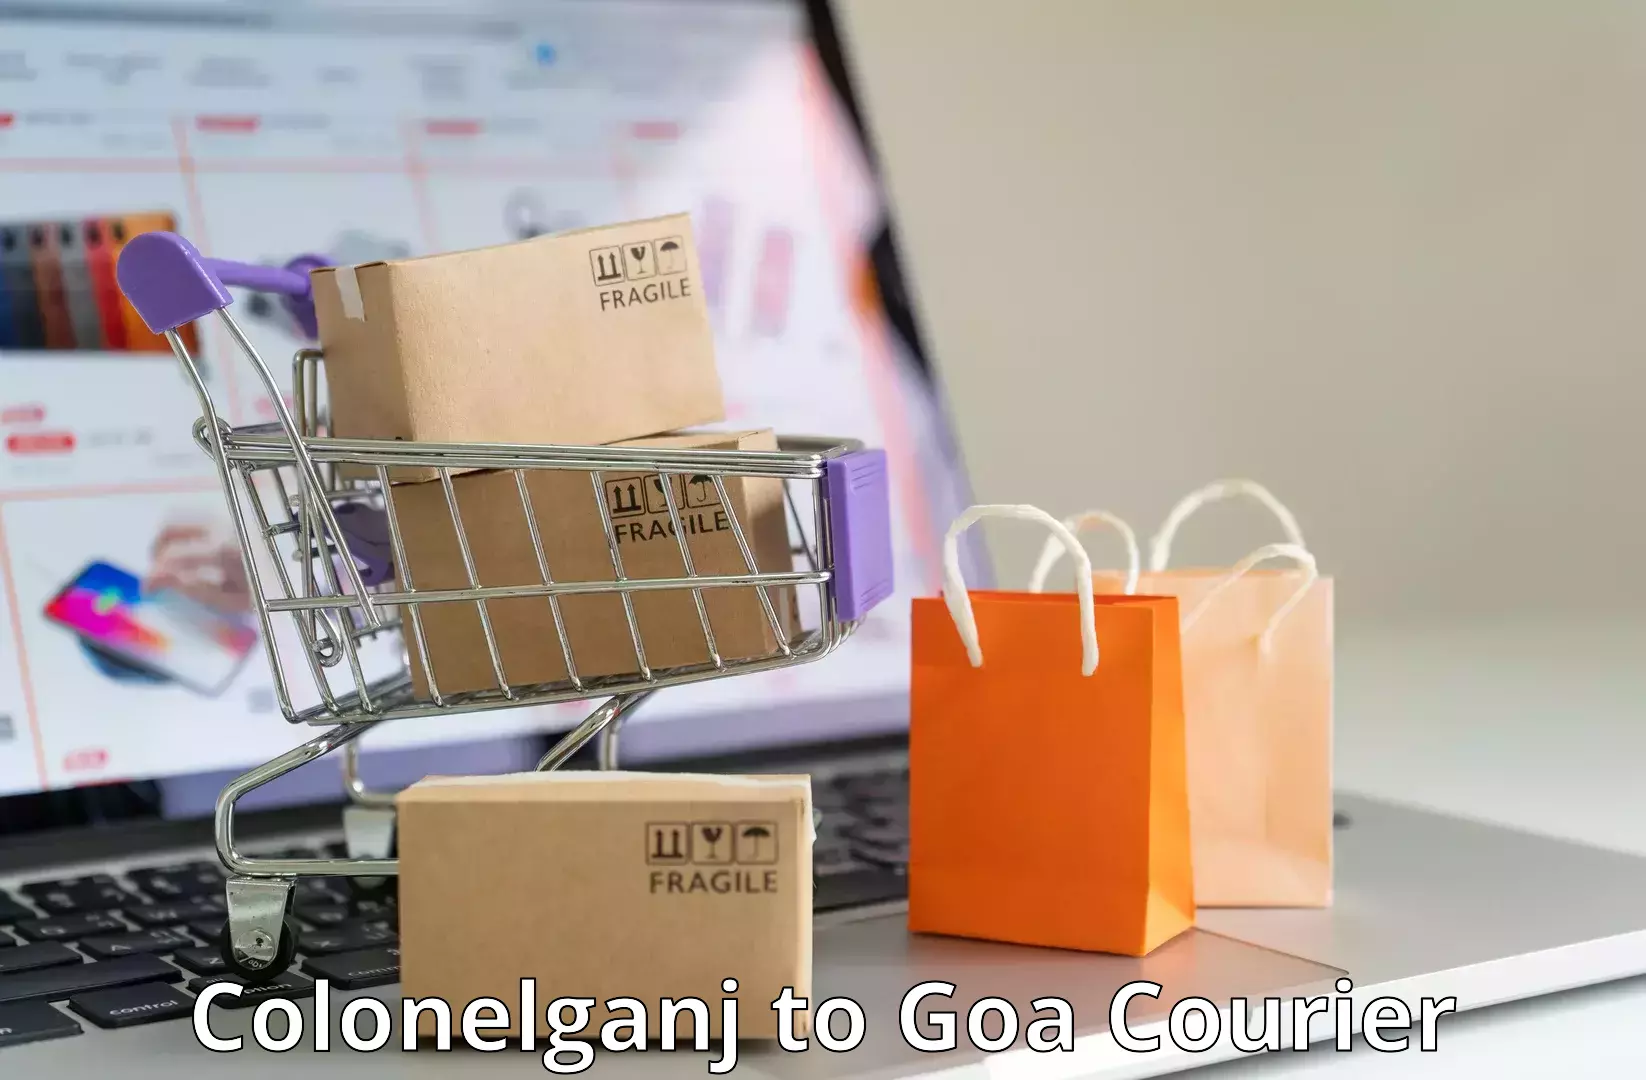 Package tracking Colonelganj to Goa